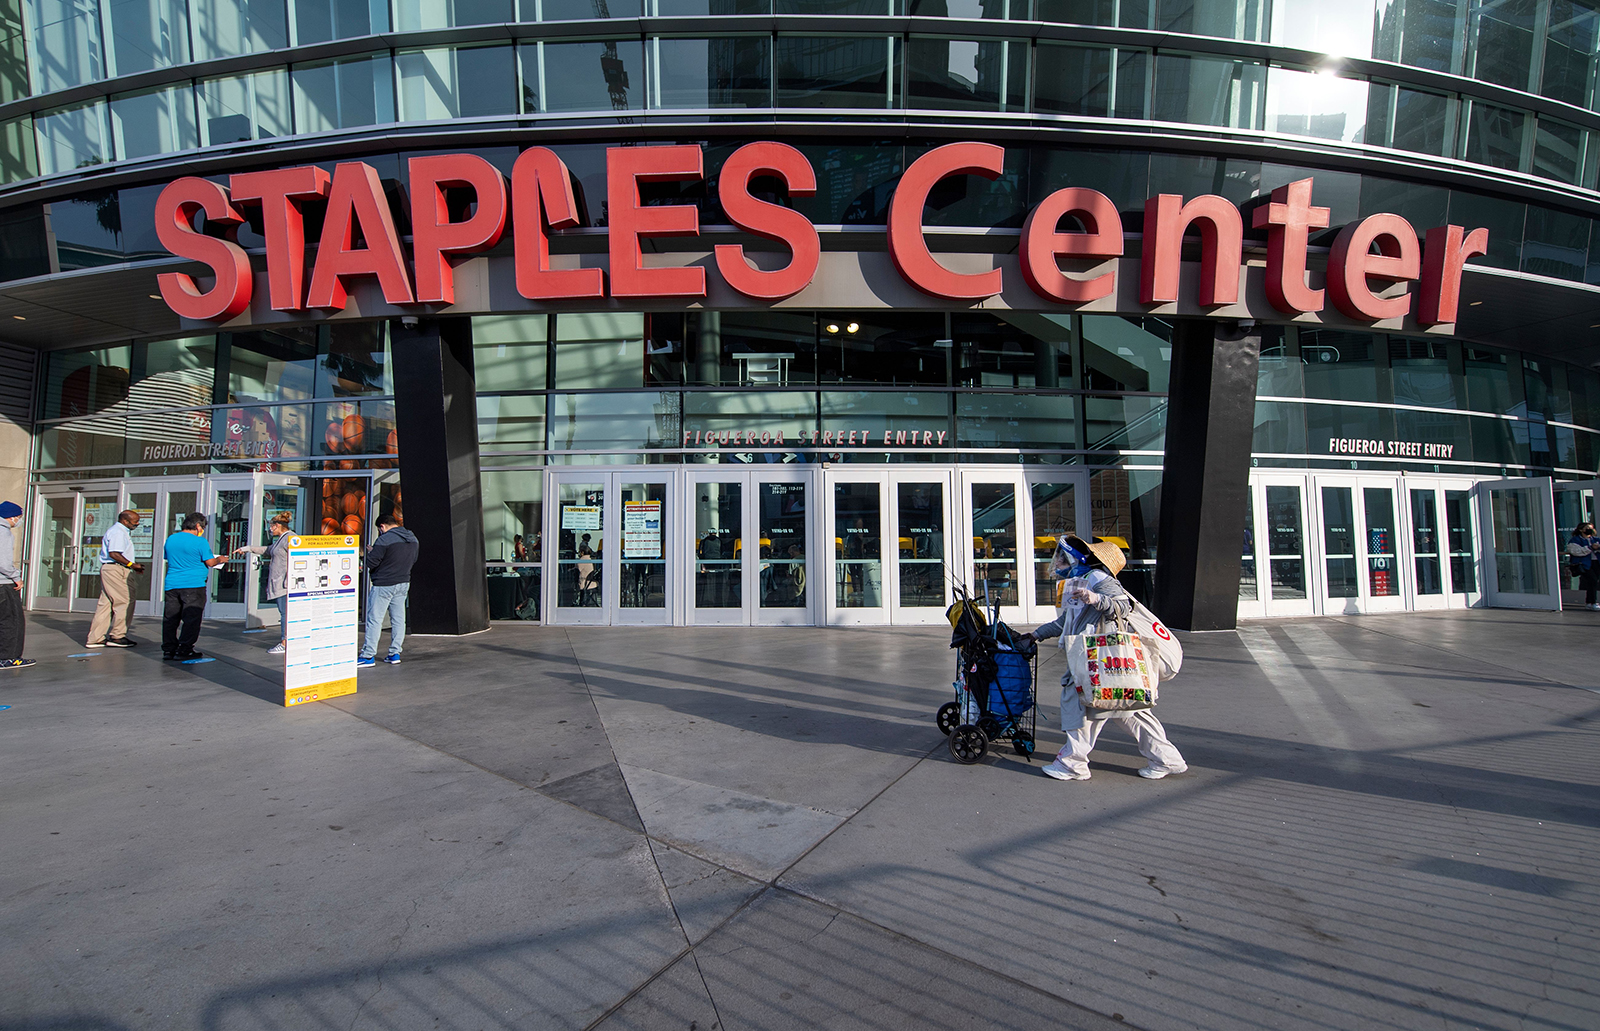 A voter arrives at the Staples Center to drop off a ballot during the presidential election on November 3, in Los Angeles.